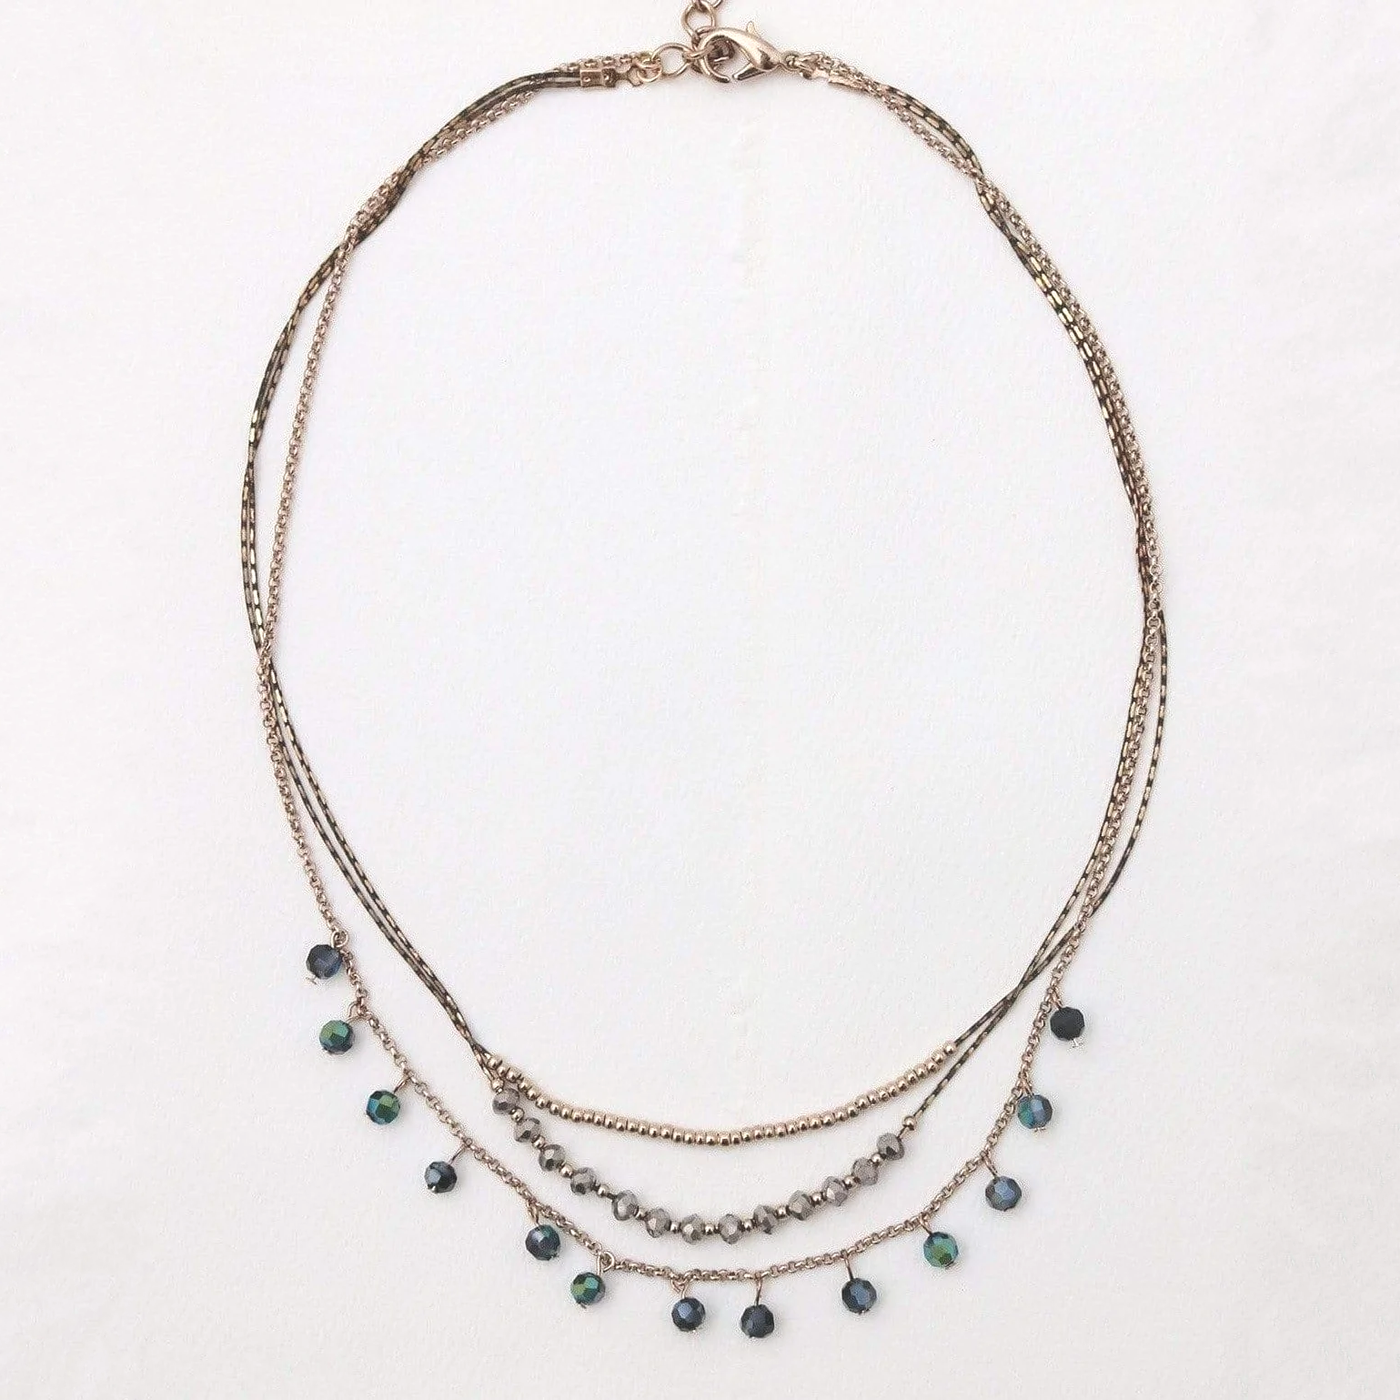 Gotstyle Fashion - Lover's Tempo Jewellery Horizon Necklace - Midnight